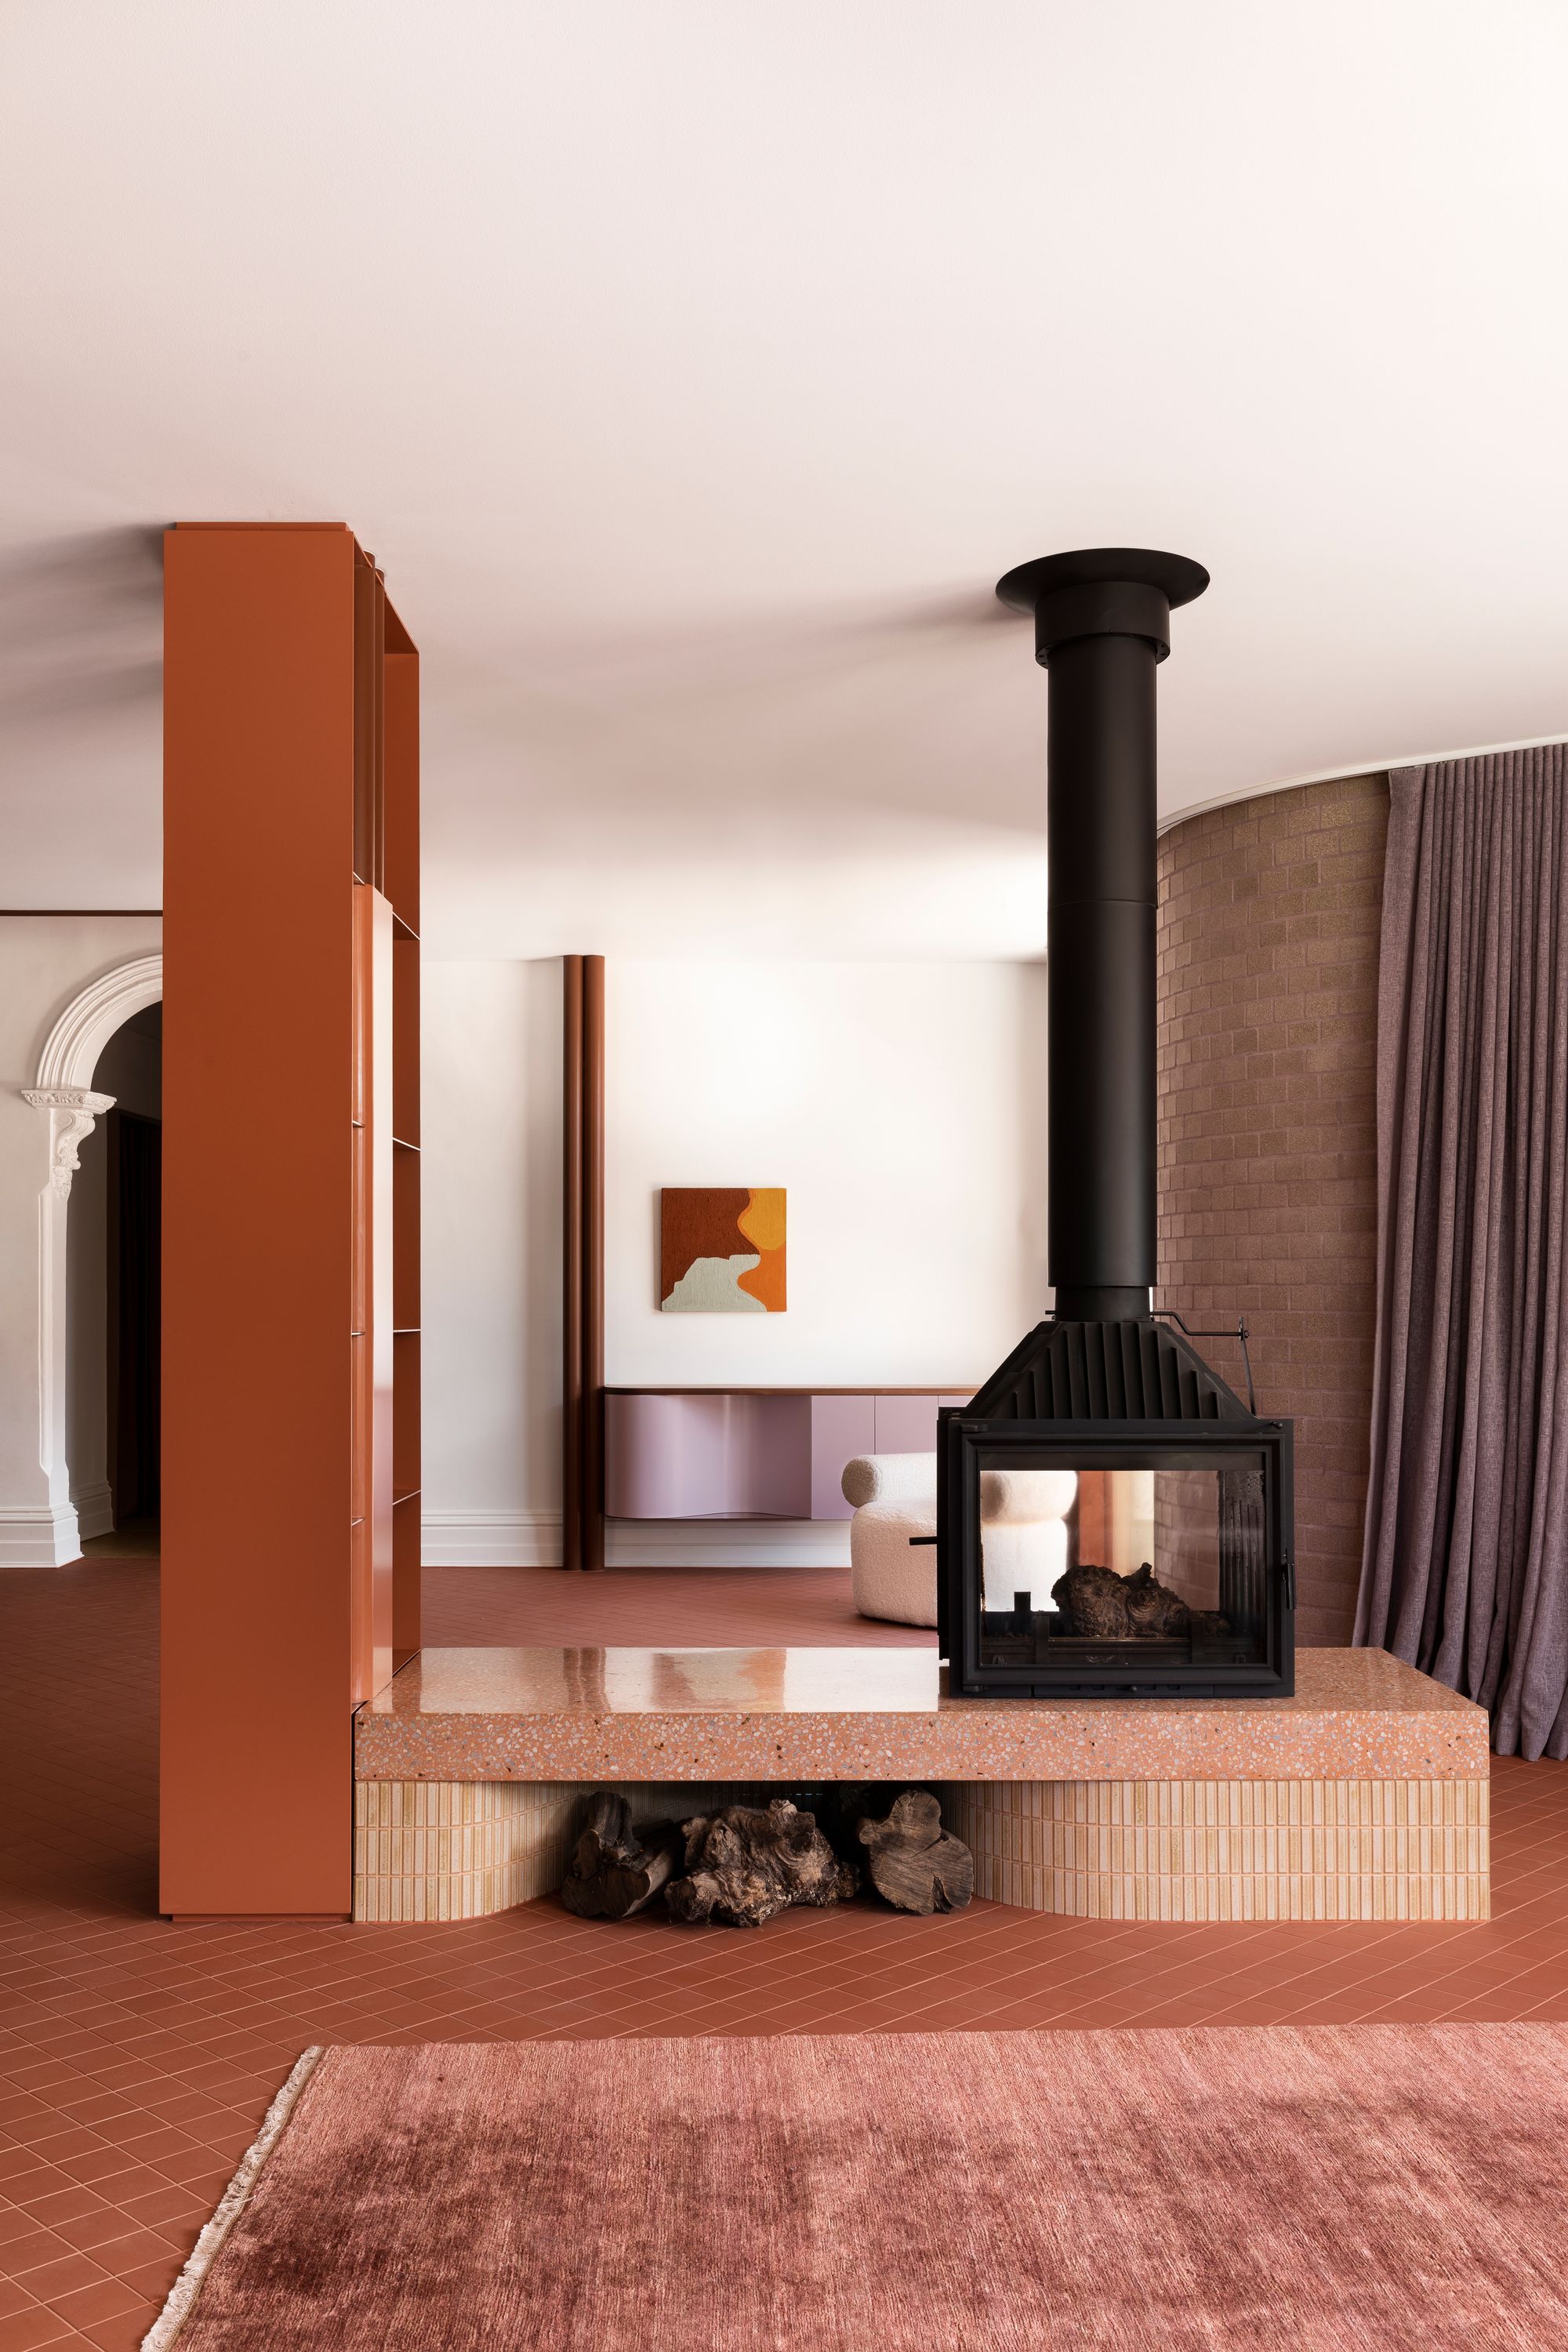 Hermon by WOWOWA. Fireplace diving the living spaces.